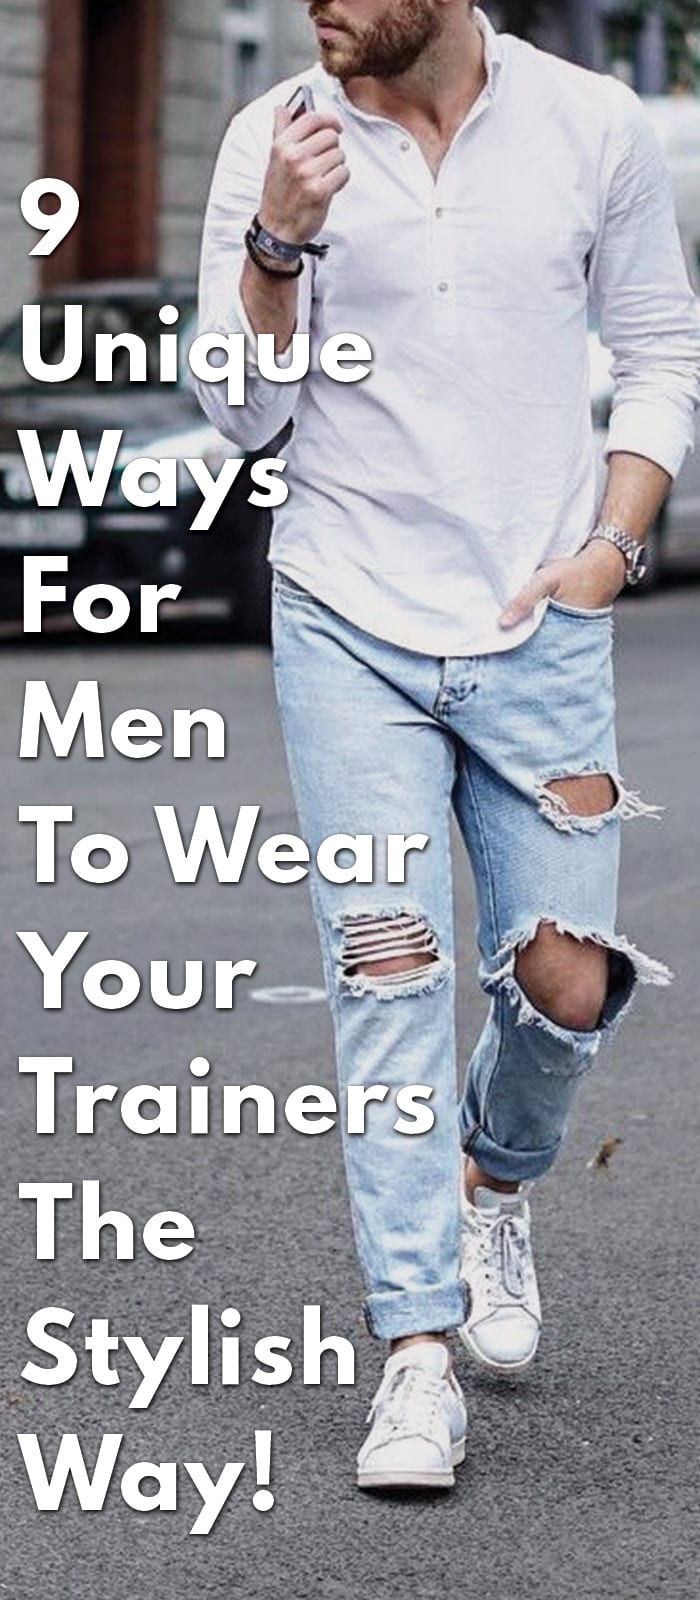 9-Unique-Ways-For-Men-To-Wear-Your-Trainers-The-Stylish-Way!